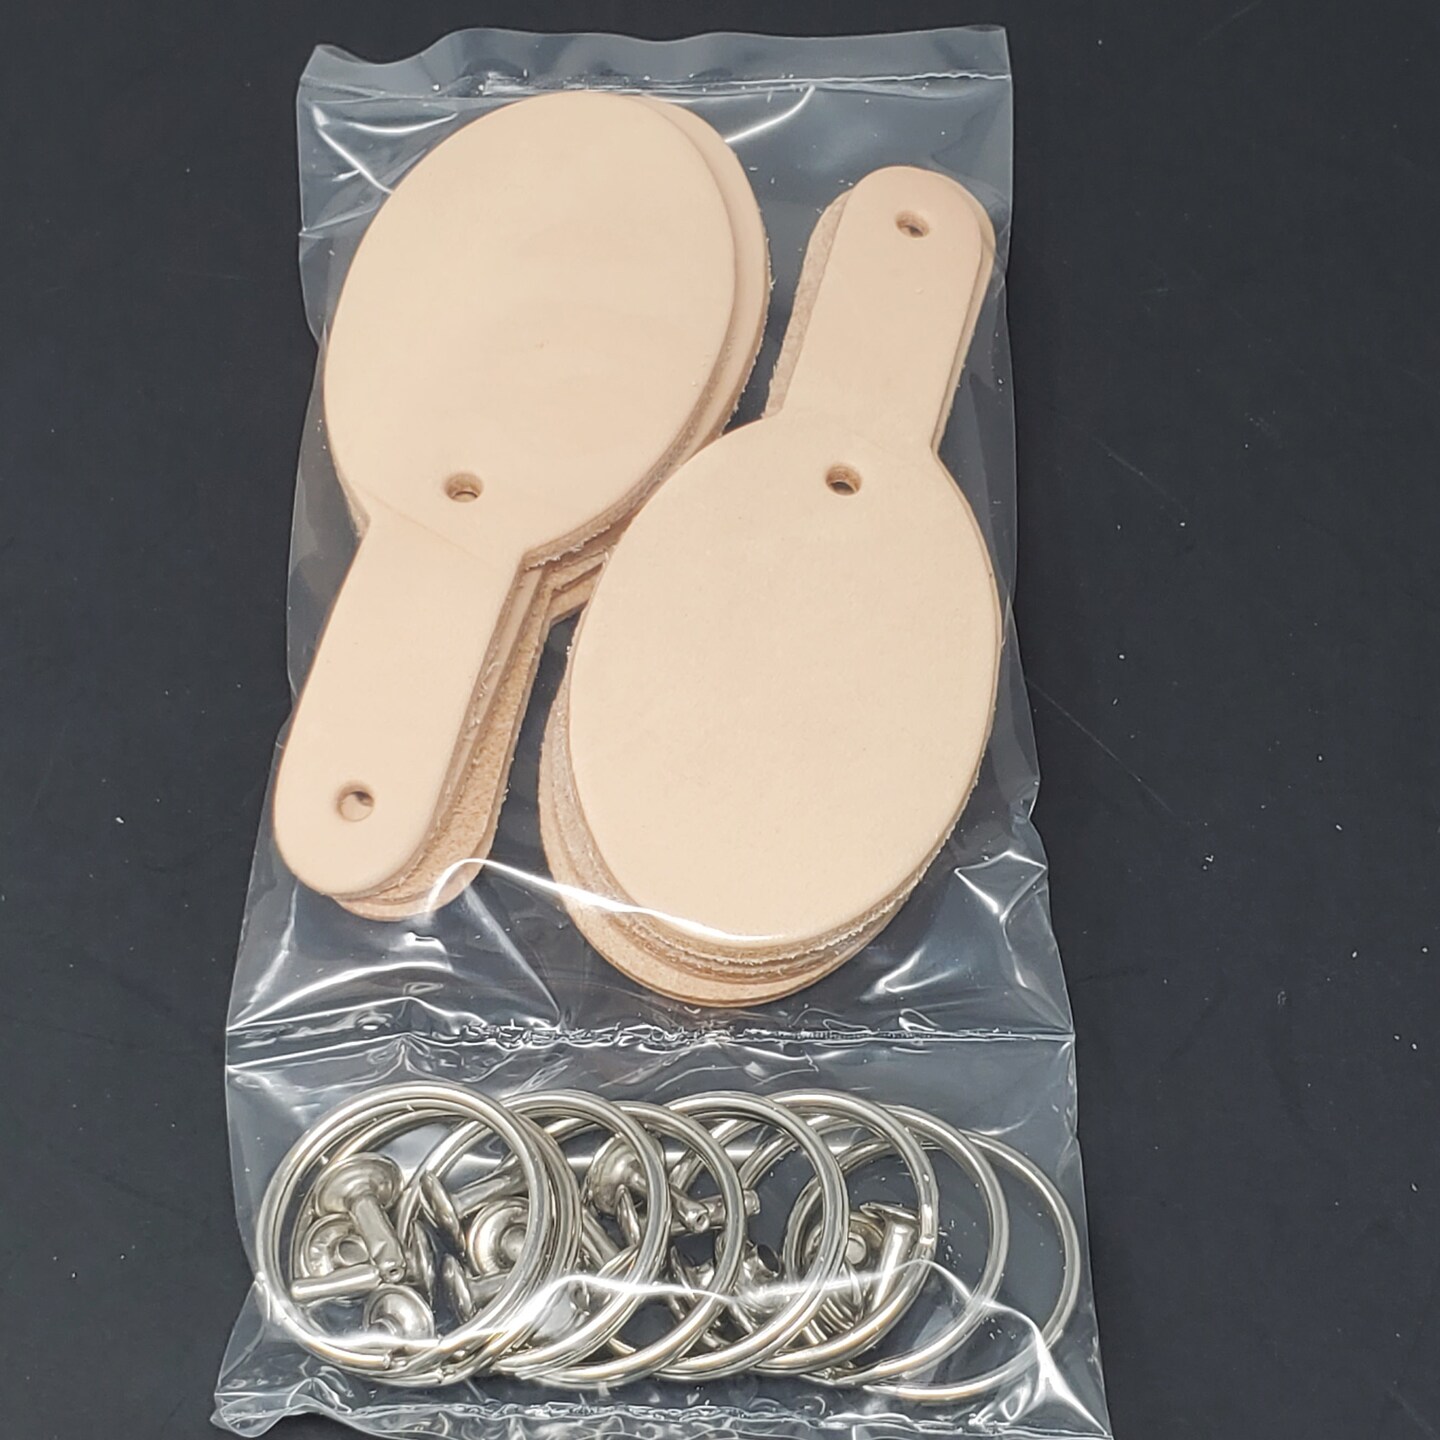 Natural Leather Keychains Kit ,Blank Key Fobs, 10 Pre Punched Natural Veg Tanned DIY Leather Key Fobs